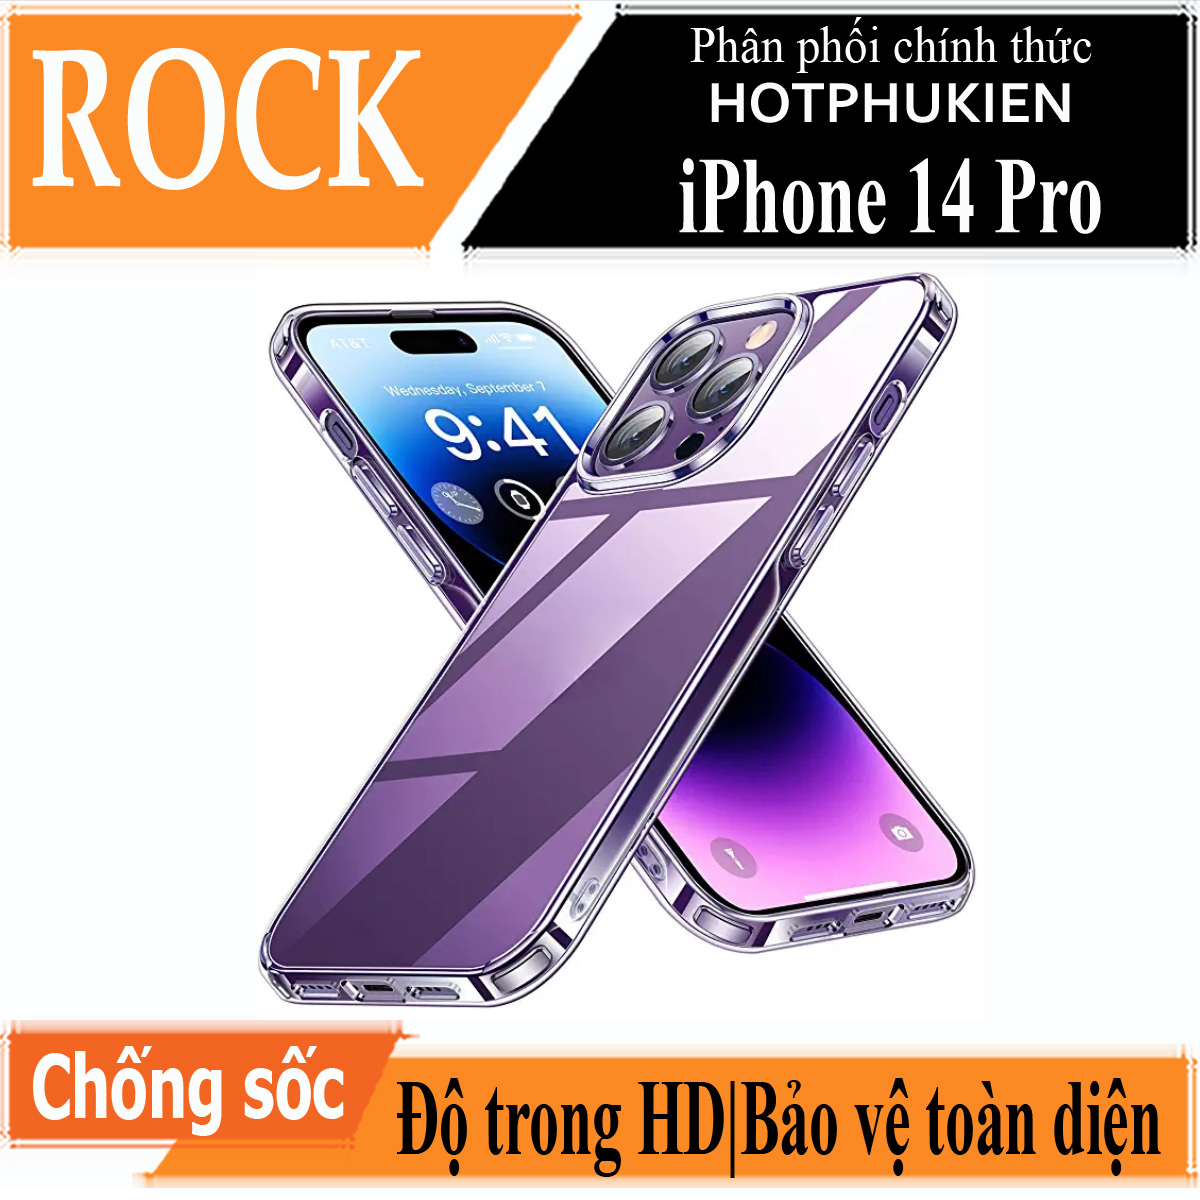 Ốp lưng chống sốc trong suốt cho iPhone 14 Pro (6.1 inch) hiệu Rock Space Protective Case